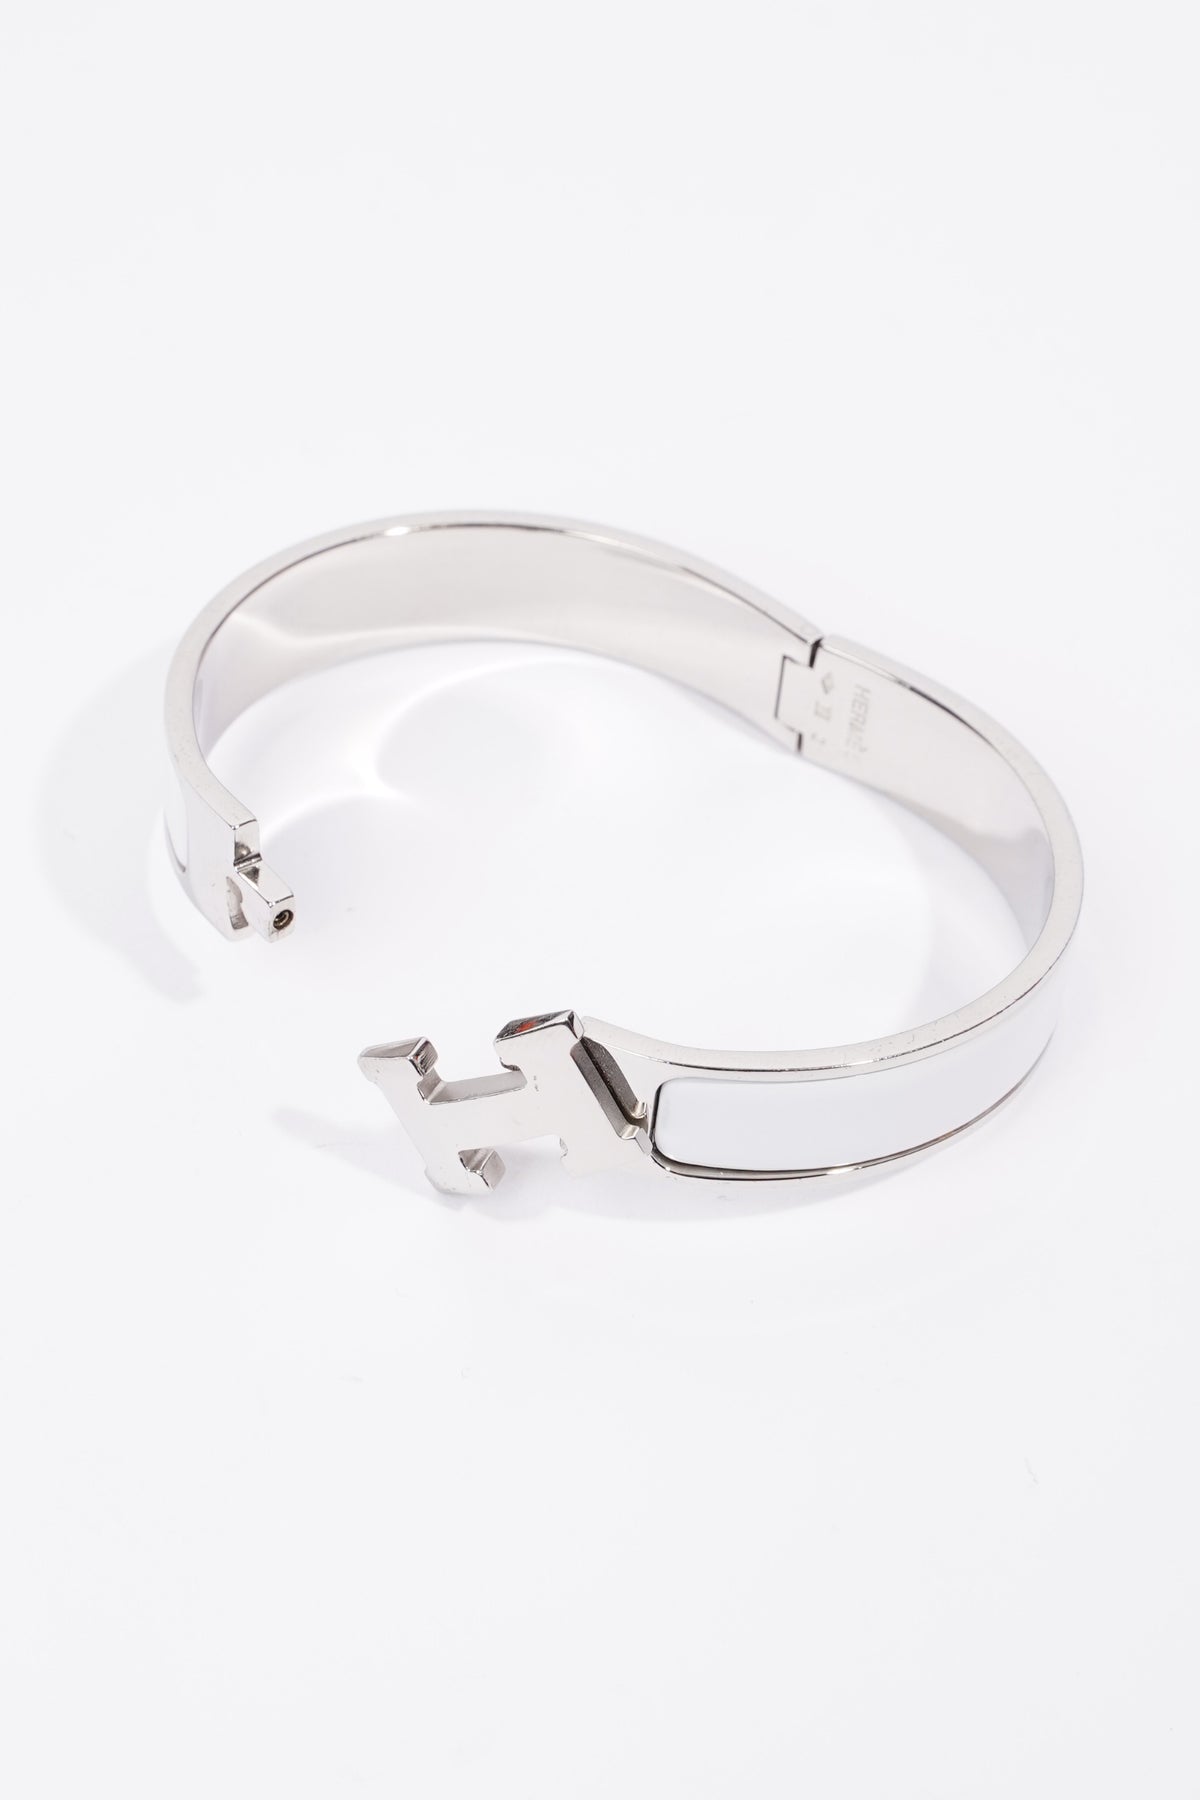 Hermes Narrow Clic H Bracelet (Noir/Palladium Plated) - GM | Rent Hermes  jewelry for $55/month - Join Switch